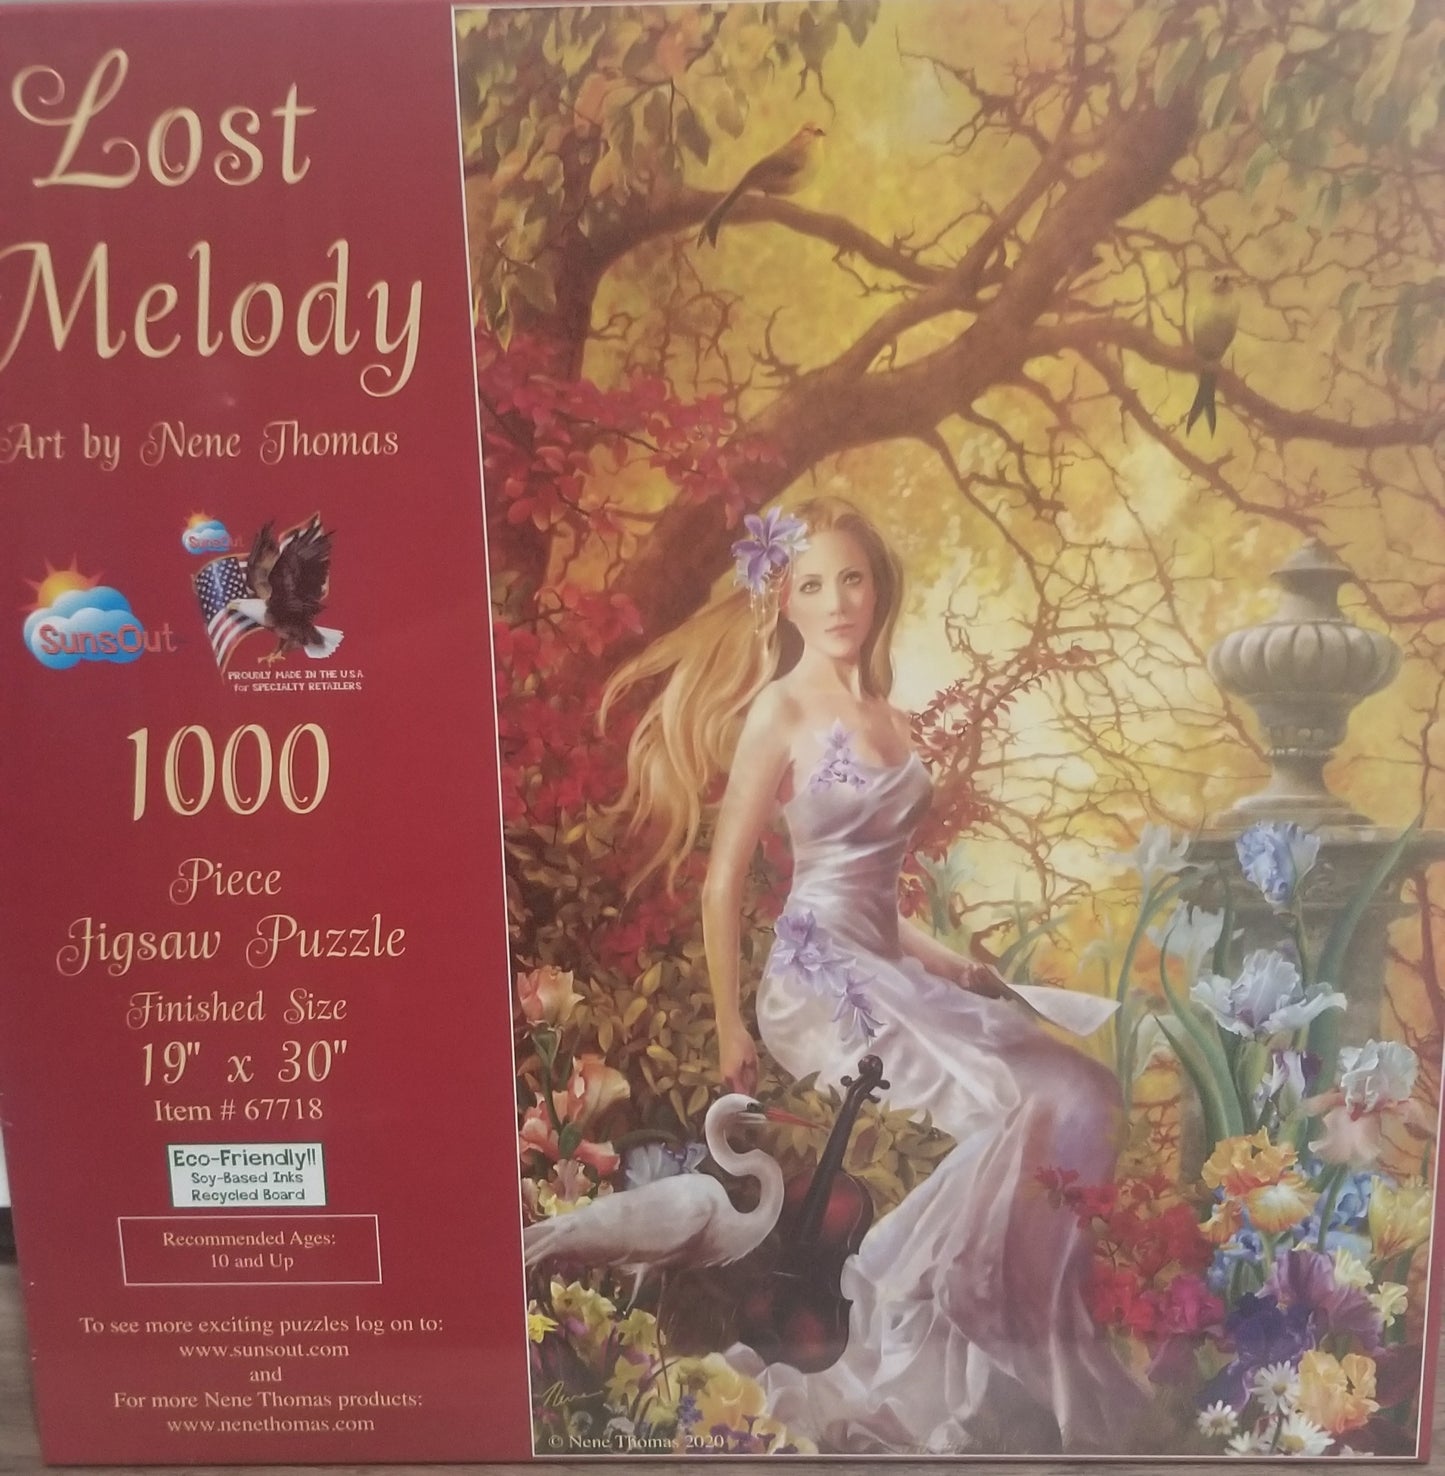 Lost Melody by Nene Thomas, 1000 Piece Puzzle